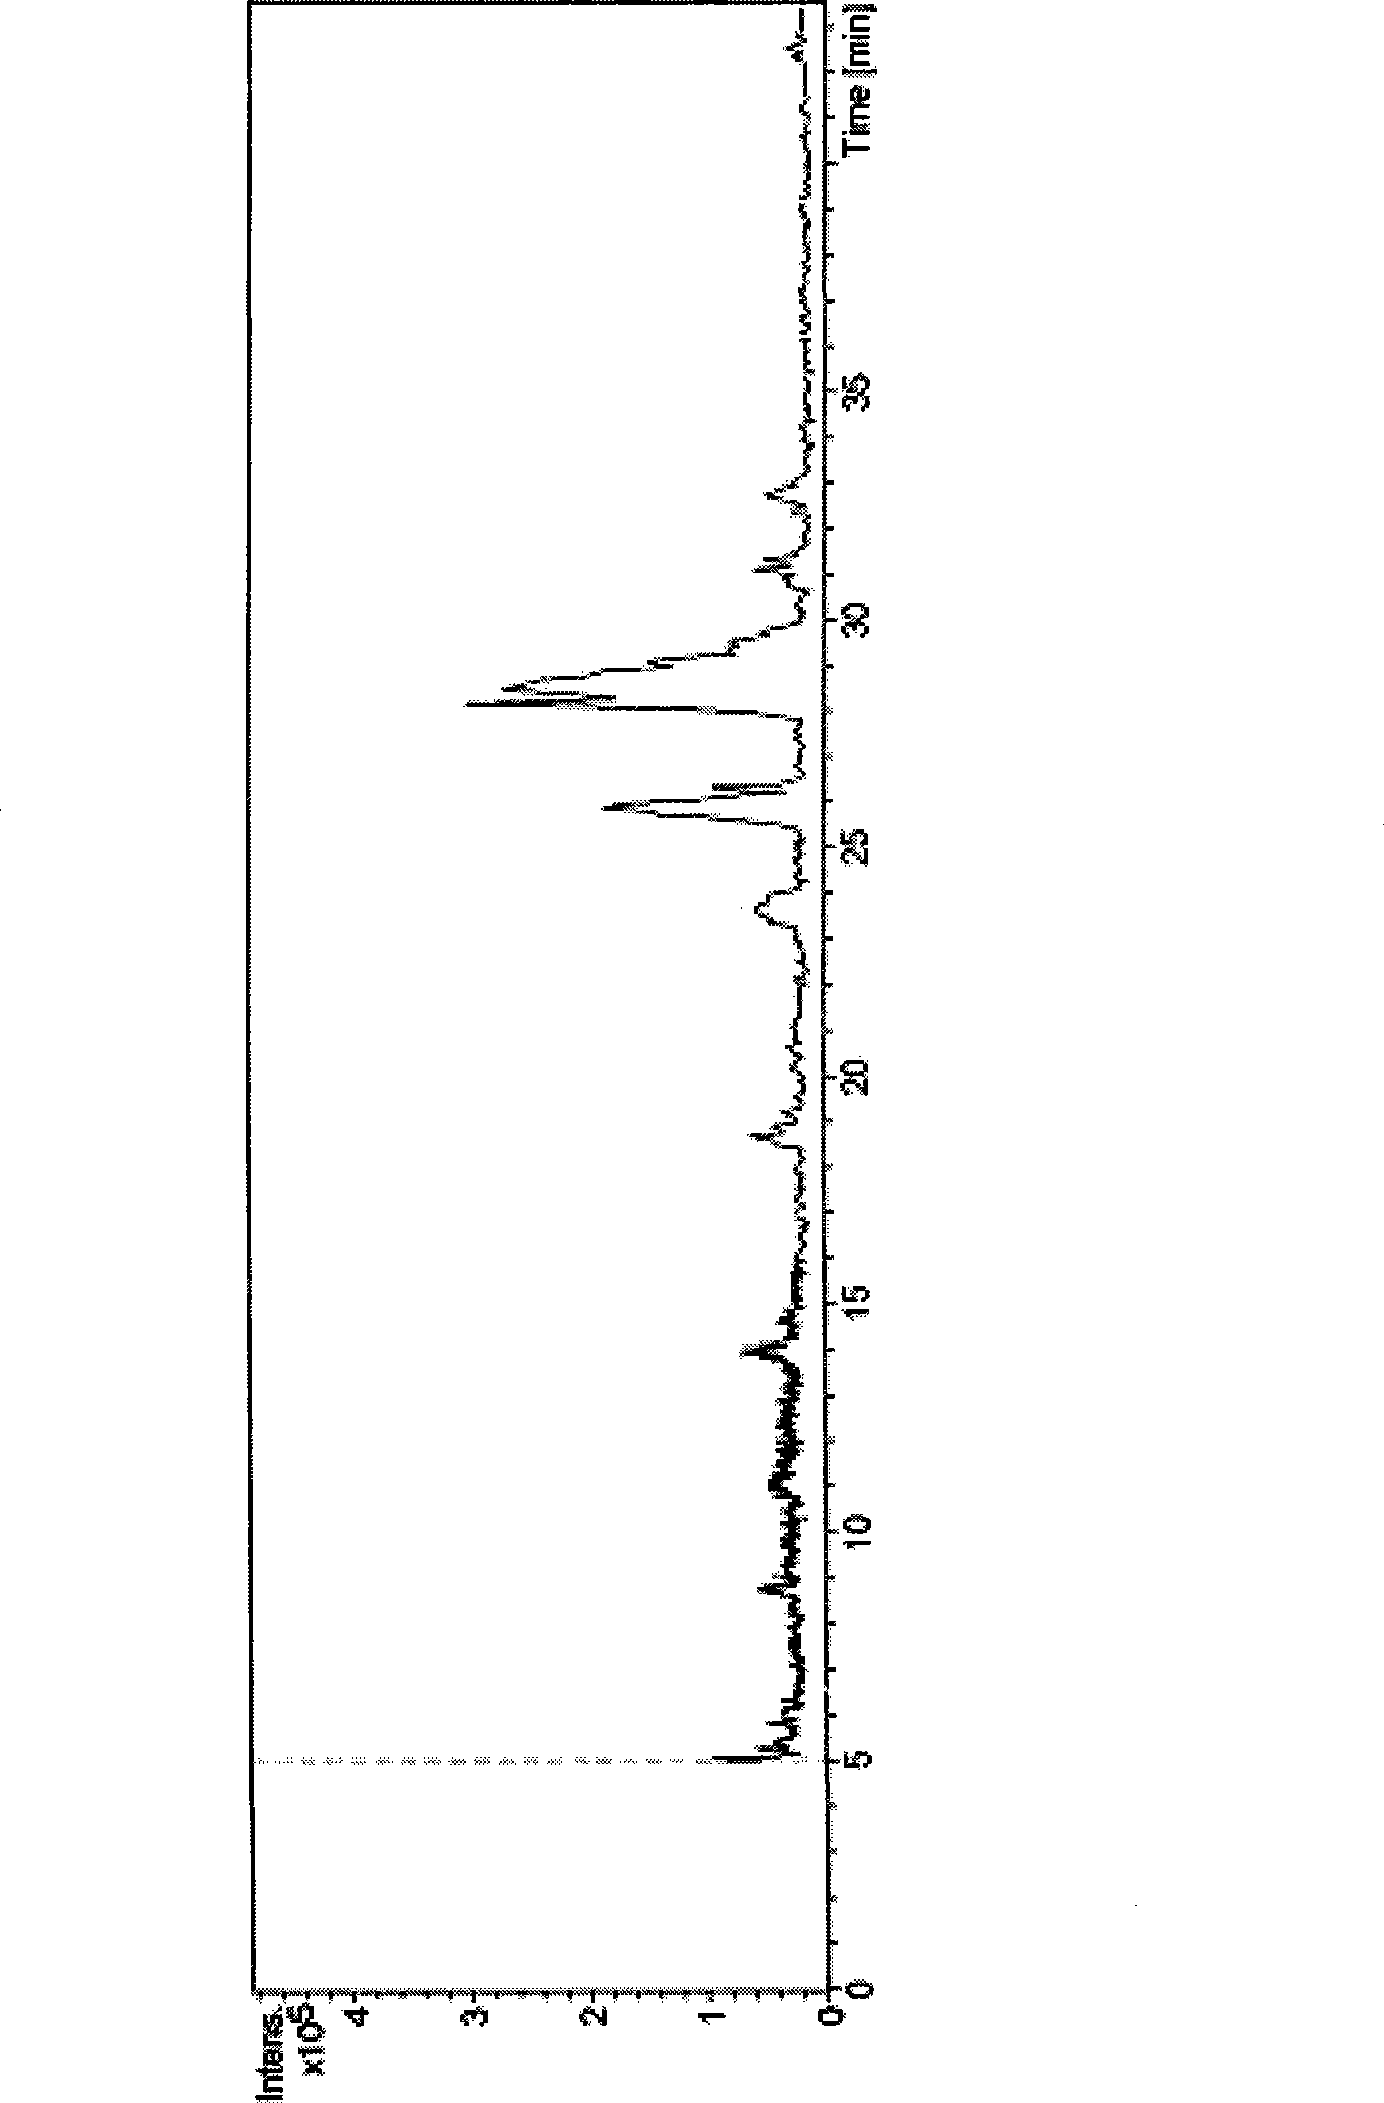 Multi-shell rhzomorph derivative, preparation and uses thereof